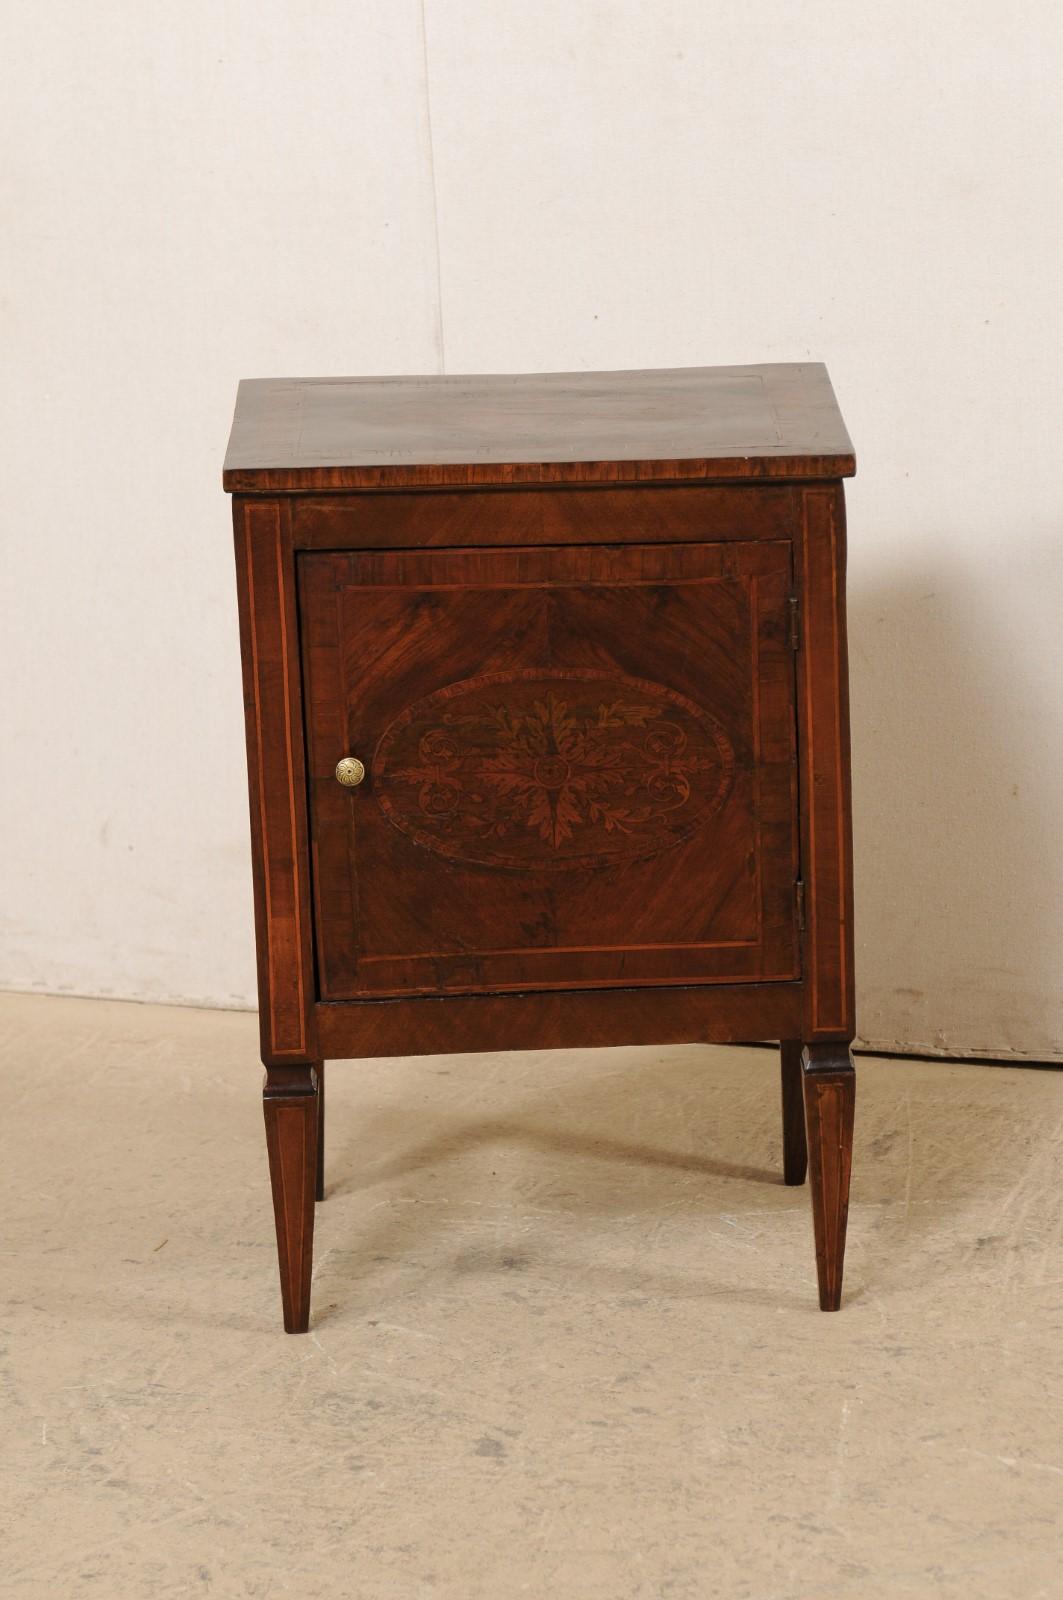 Early 19th C. Italian Small-Sized Neoclassical Cabinet w/Decorative Inlay In Good Condition For Sale In Atlanta, GA